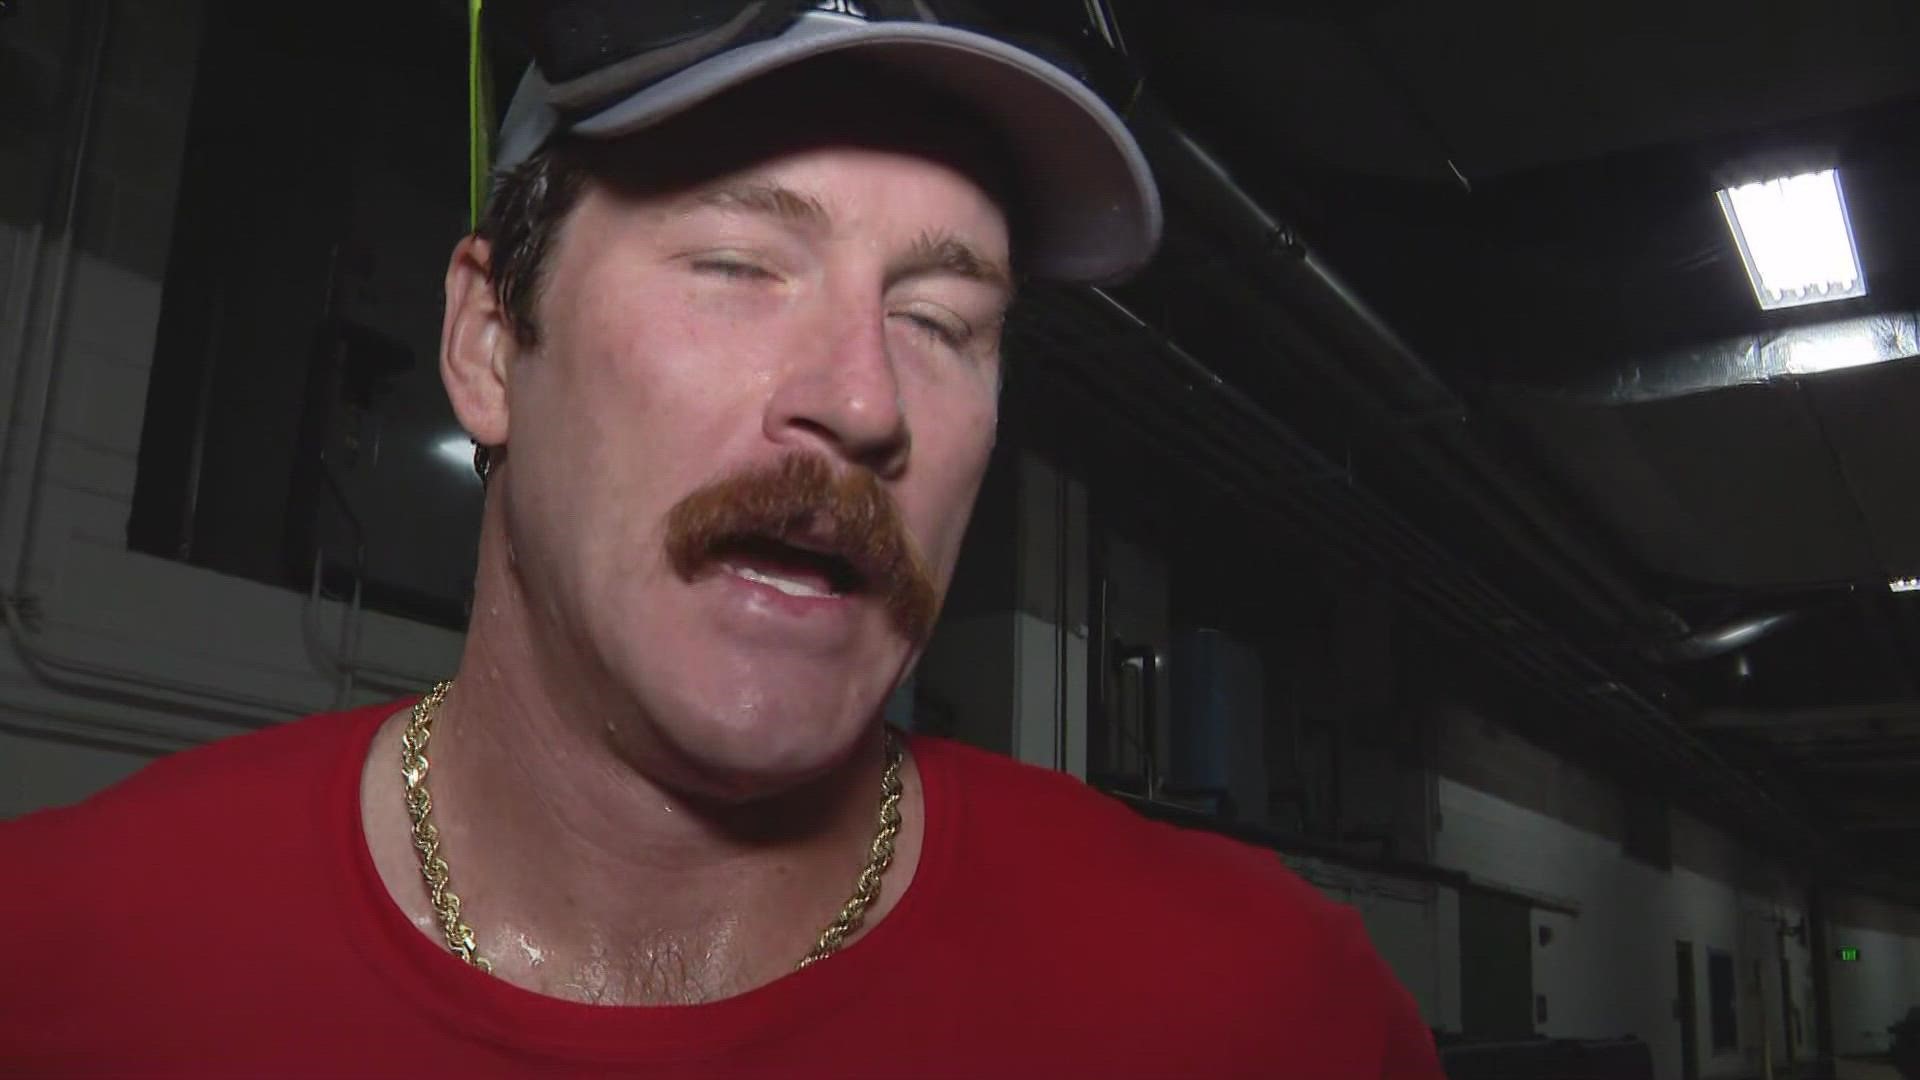 Mikolas got the win in the division-clinching game Tuesday night. He's ready for a long playoff run.